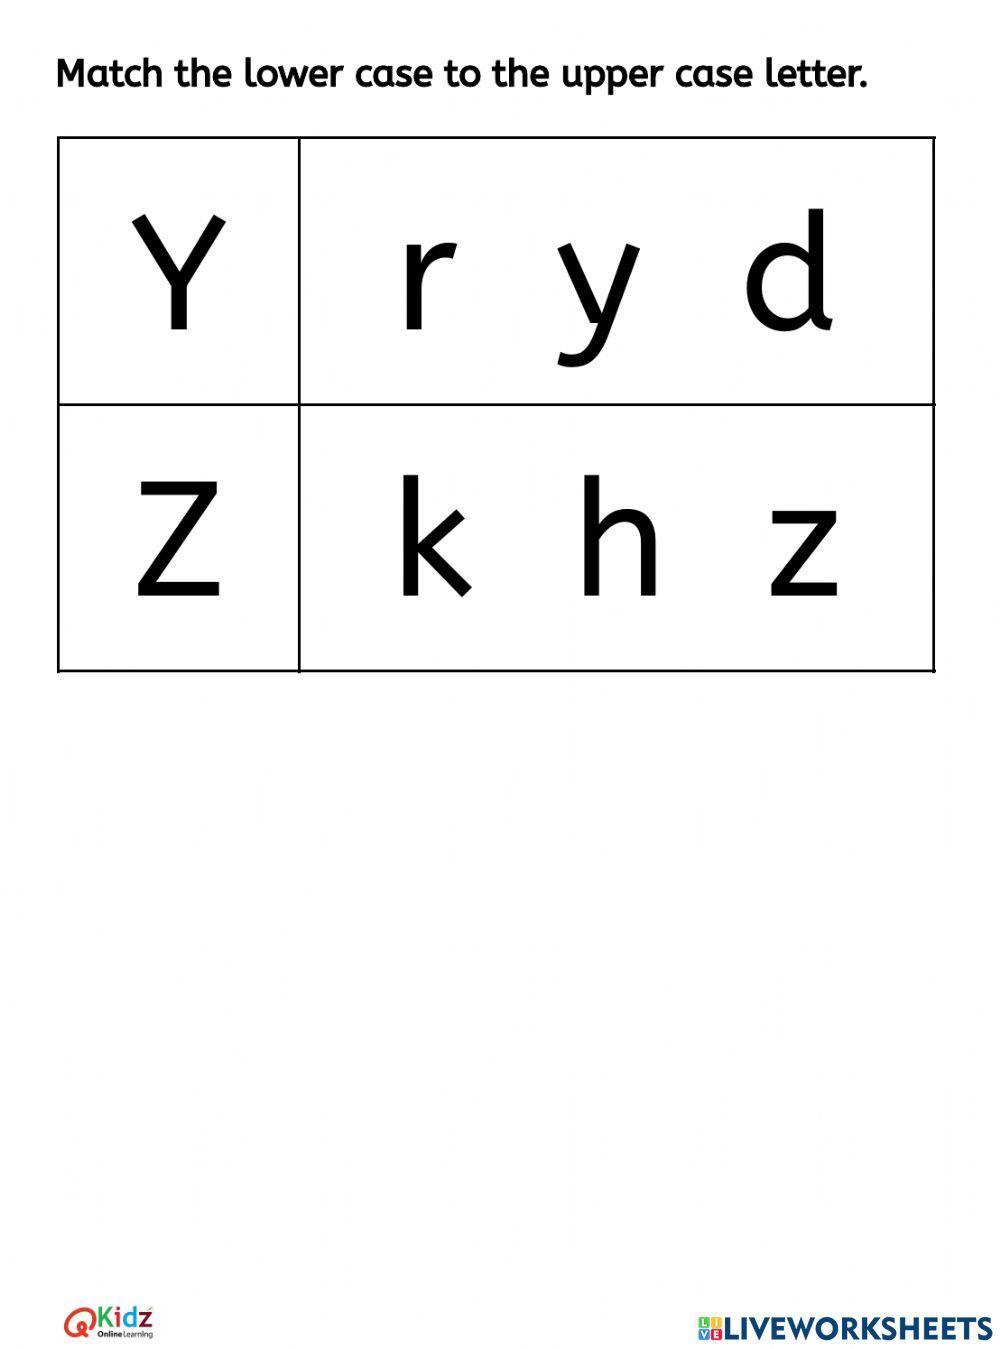 Match the Letters U V W X Y Z - Lower case to the Upper case